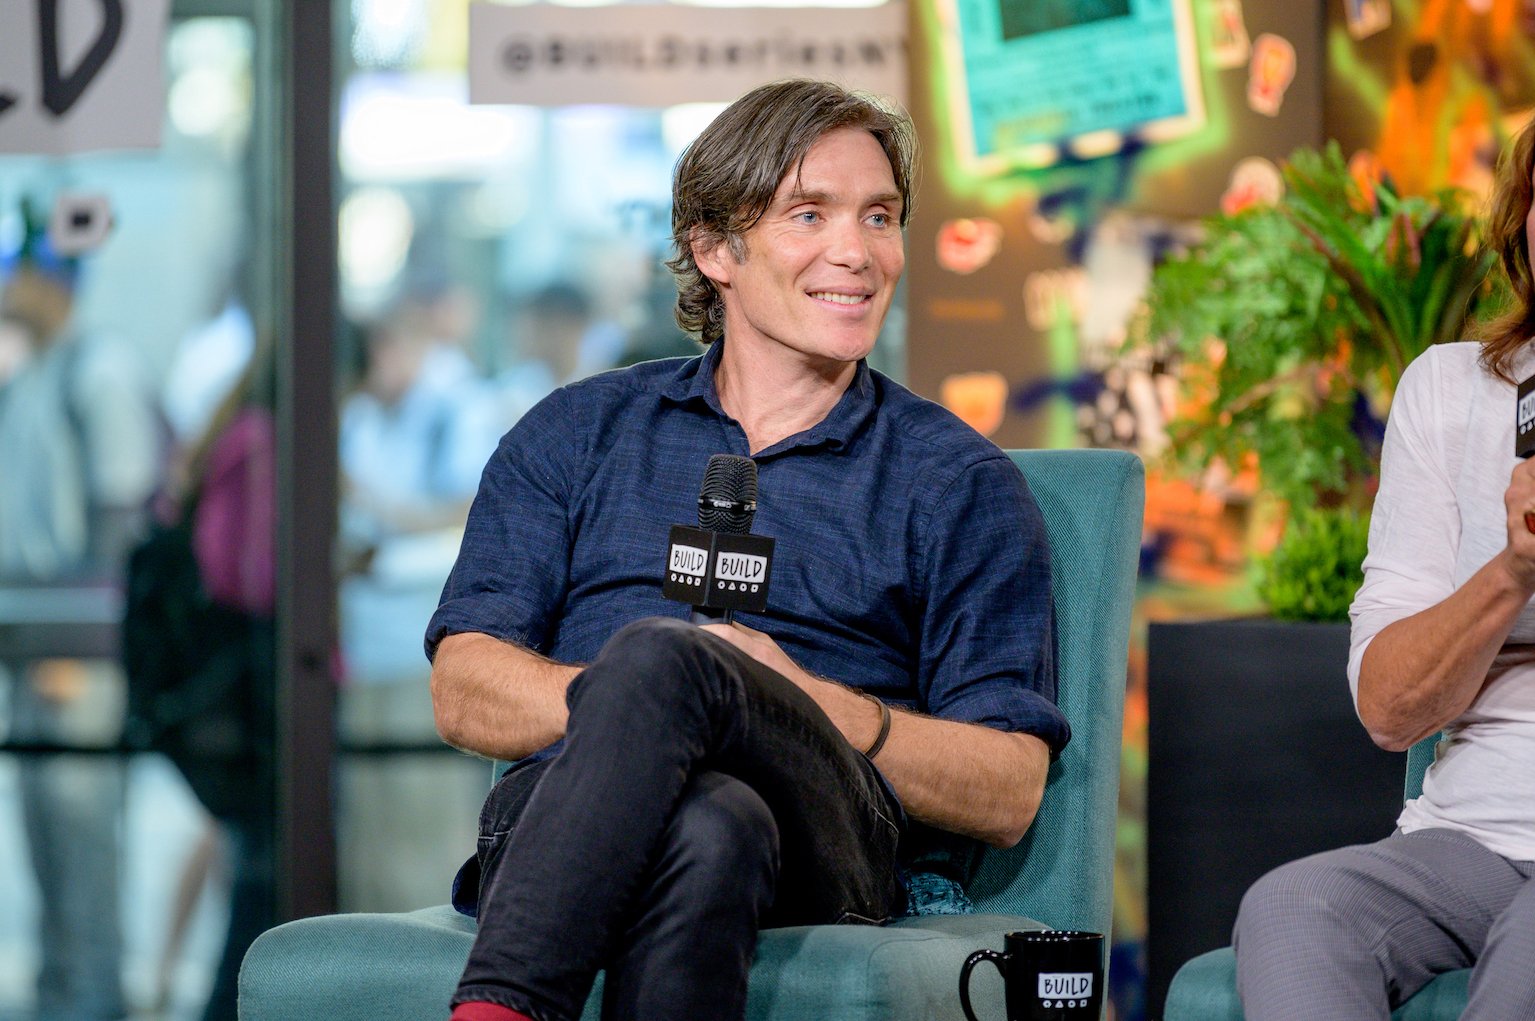 Cillian Murphy discusses 'Peaky Blinders' Season 6 while on the Build Series